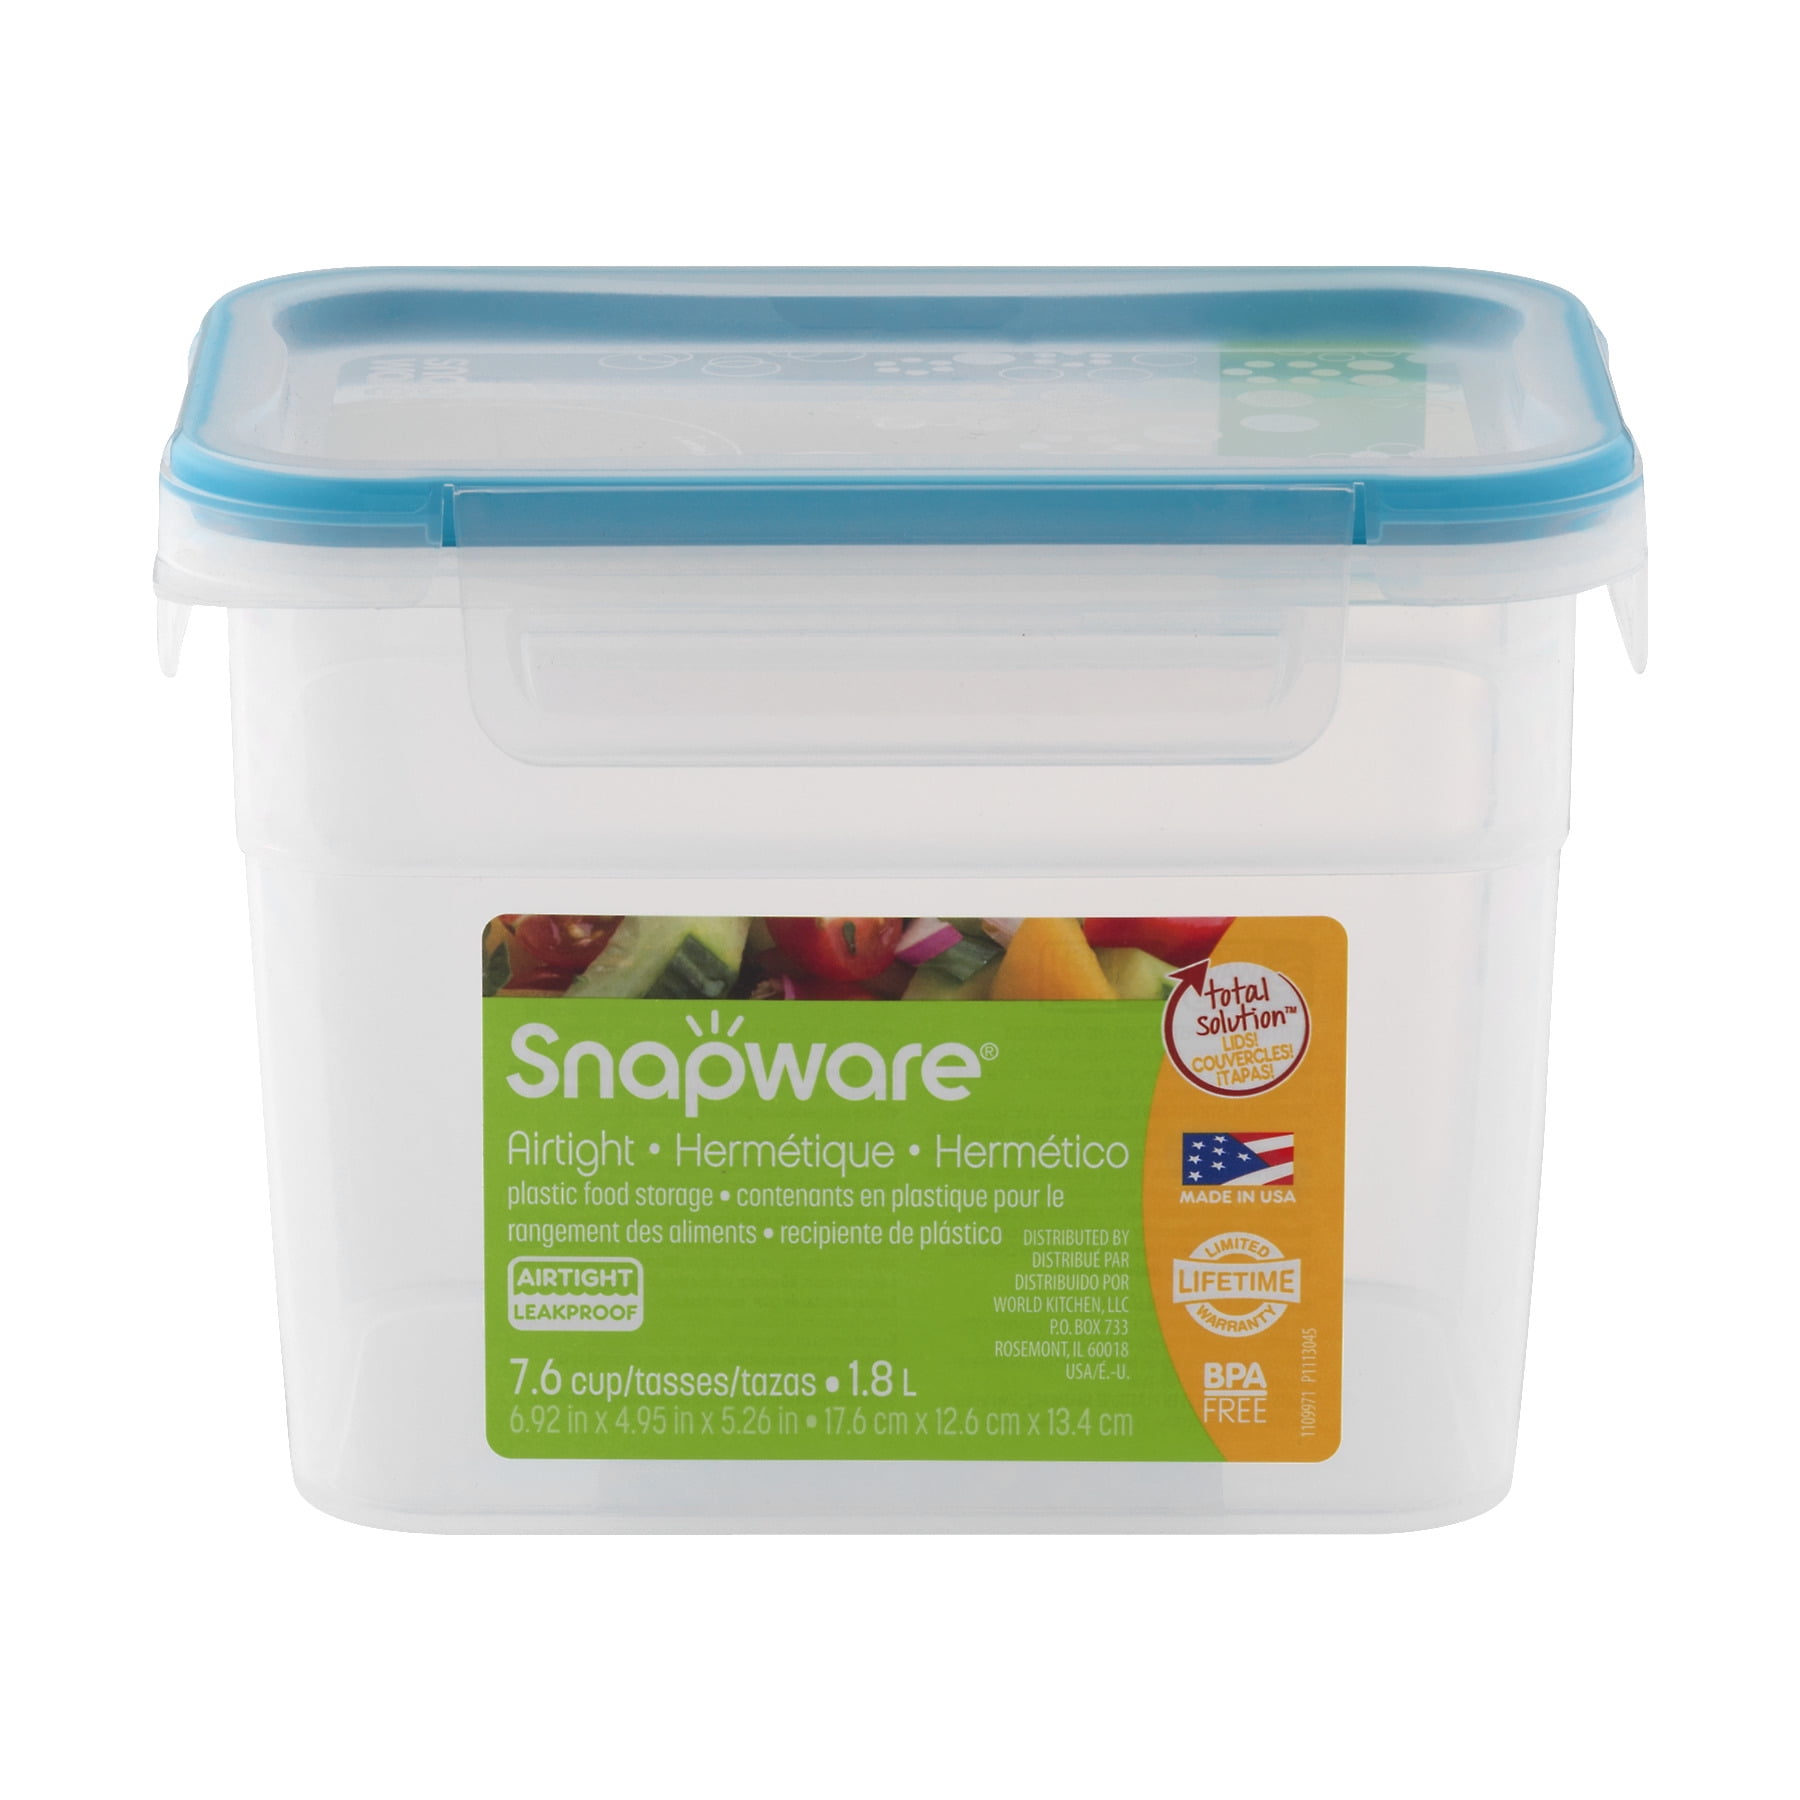  Snapware 1-Cup Total Solution Round Food Storage